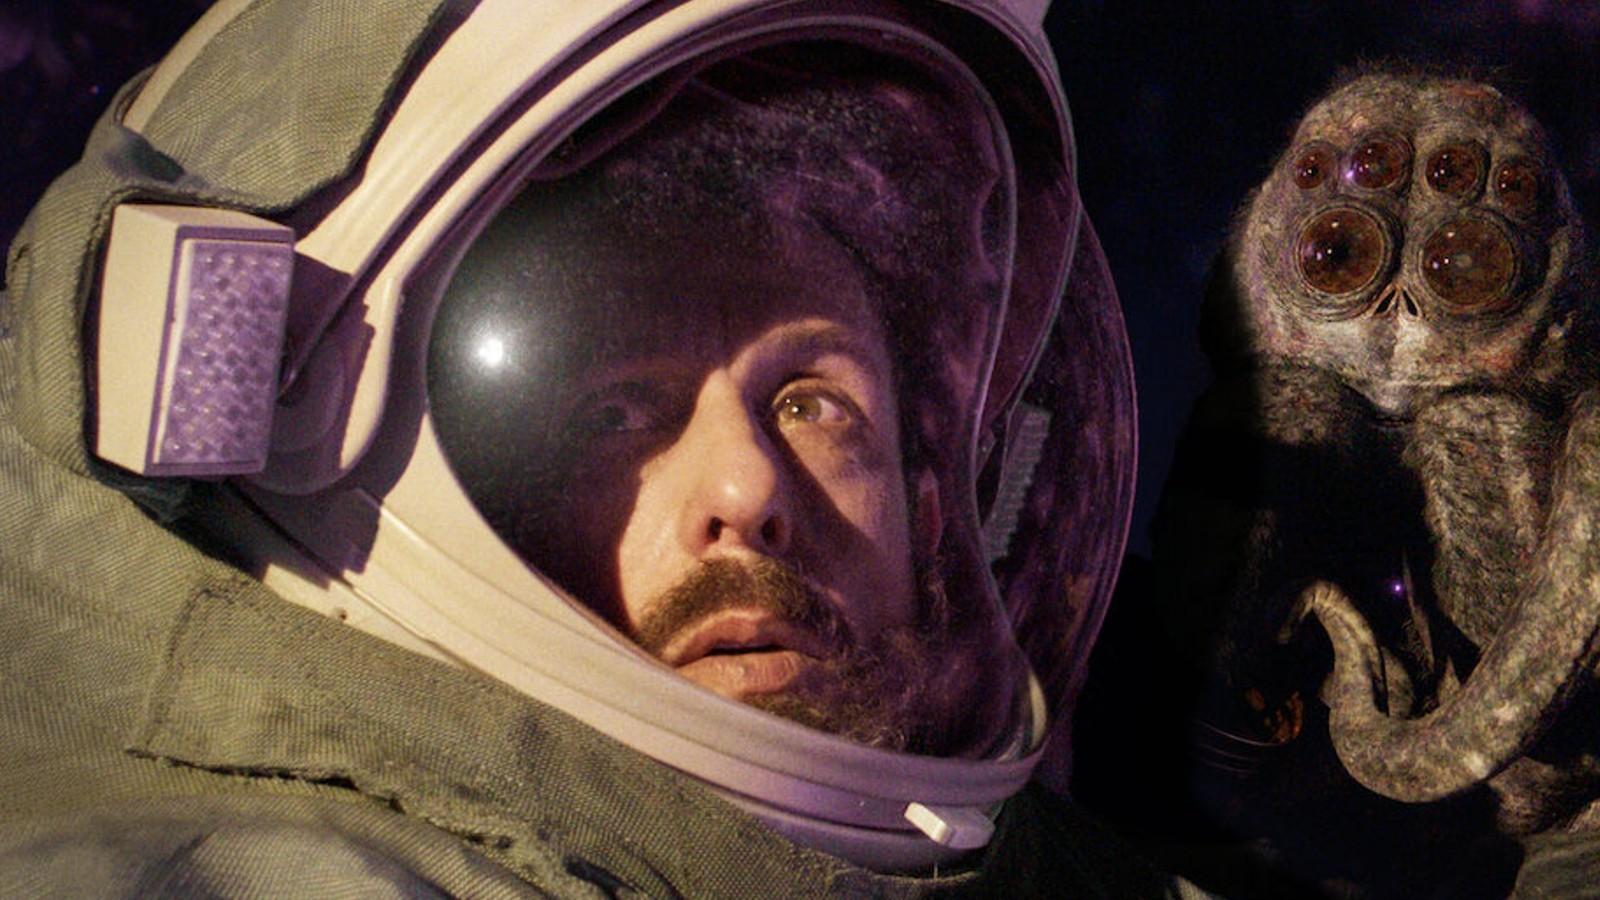 Adam Sandler in Spaceman stands in a spacesuit with a huge spider behind him.